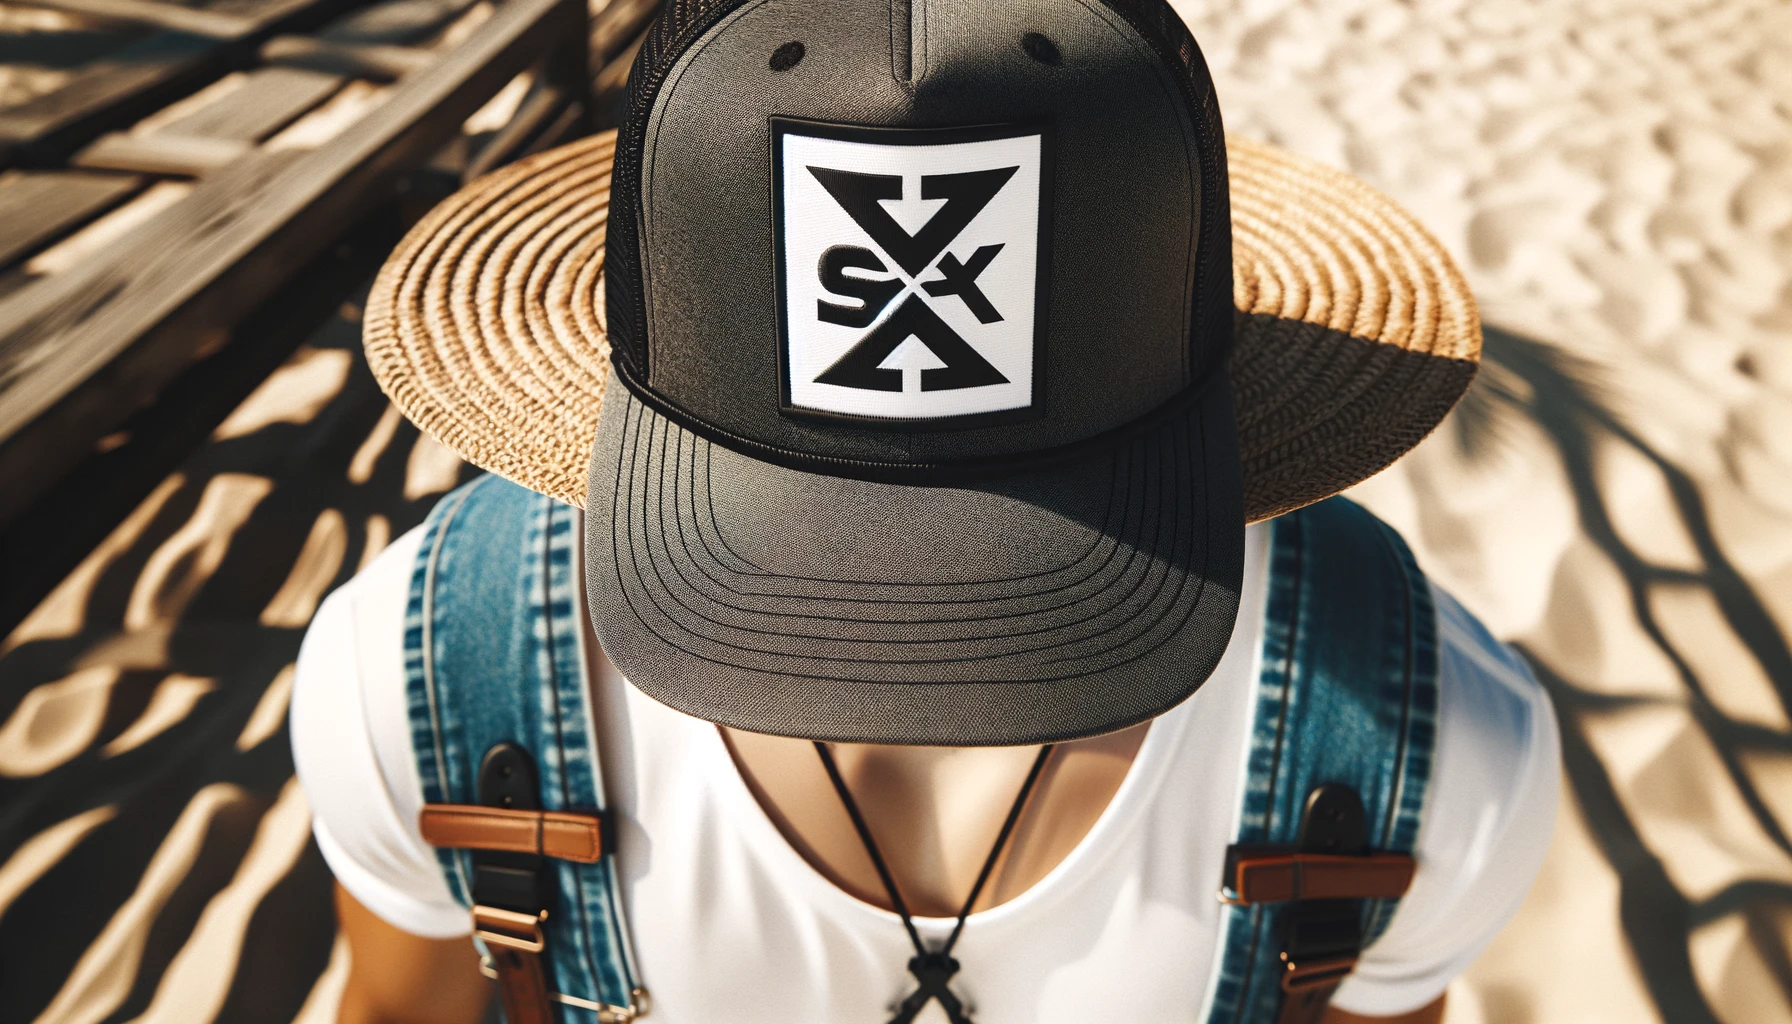 Summer outfit coordination with a cap featuring a large black and white logo in the center. The cap has 'SX' letters, with the logo blurred, removed, or not visible from the angle. The image emphasizes a cool and trendy summer look.